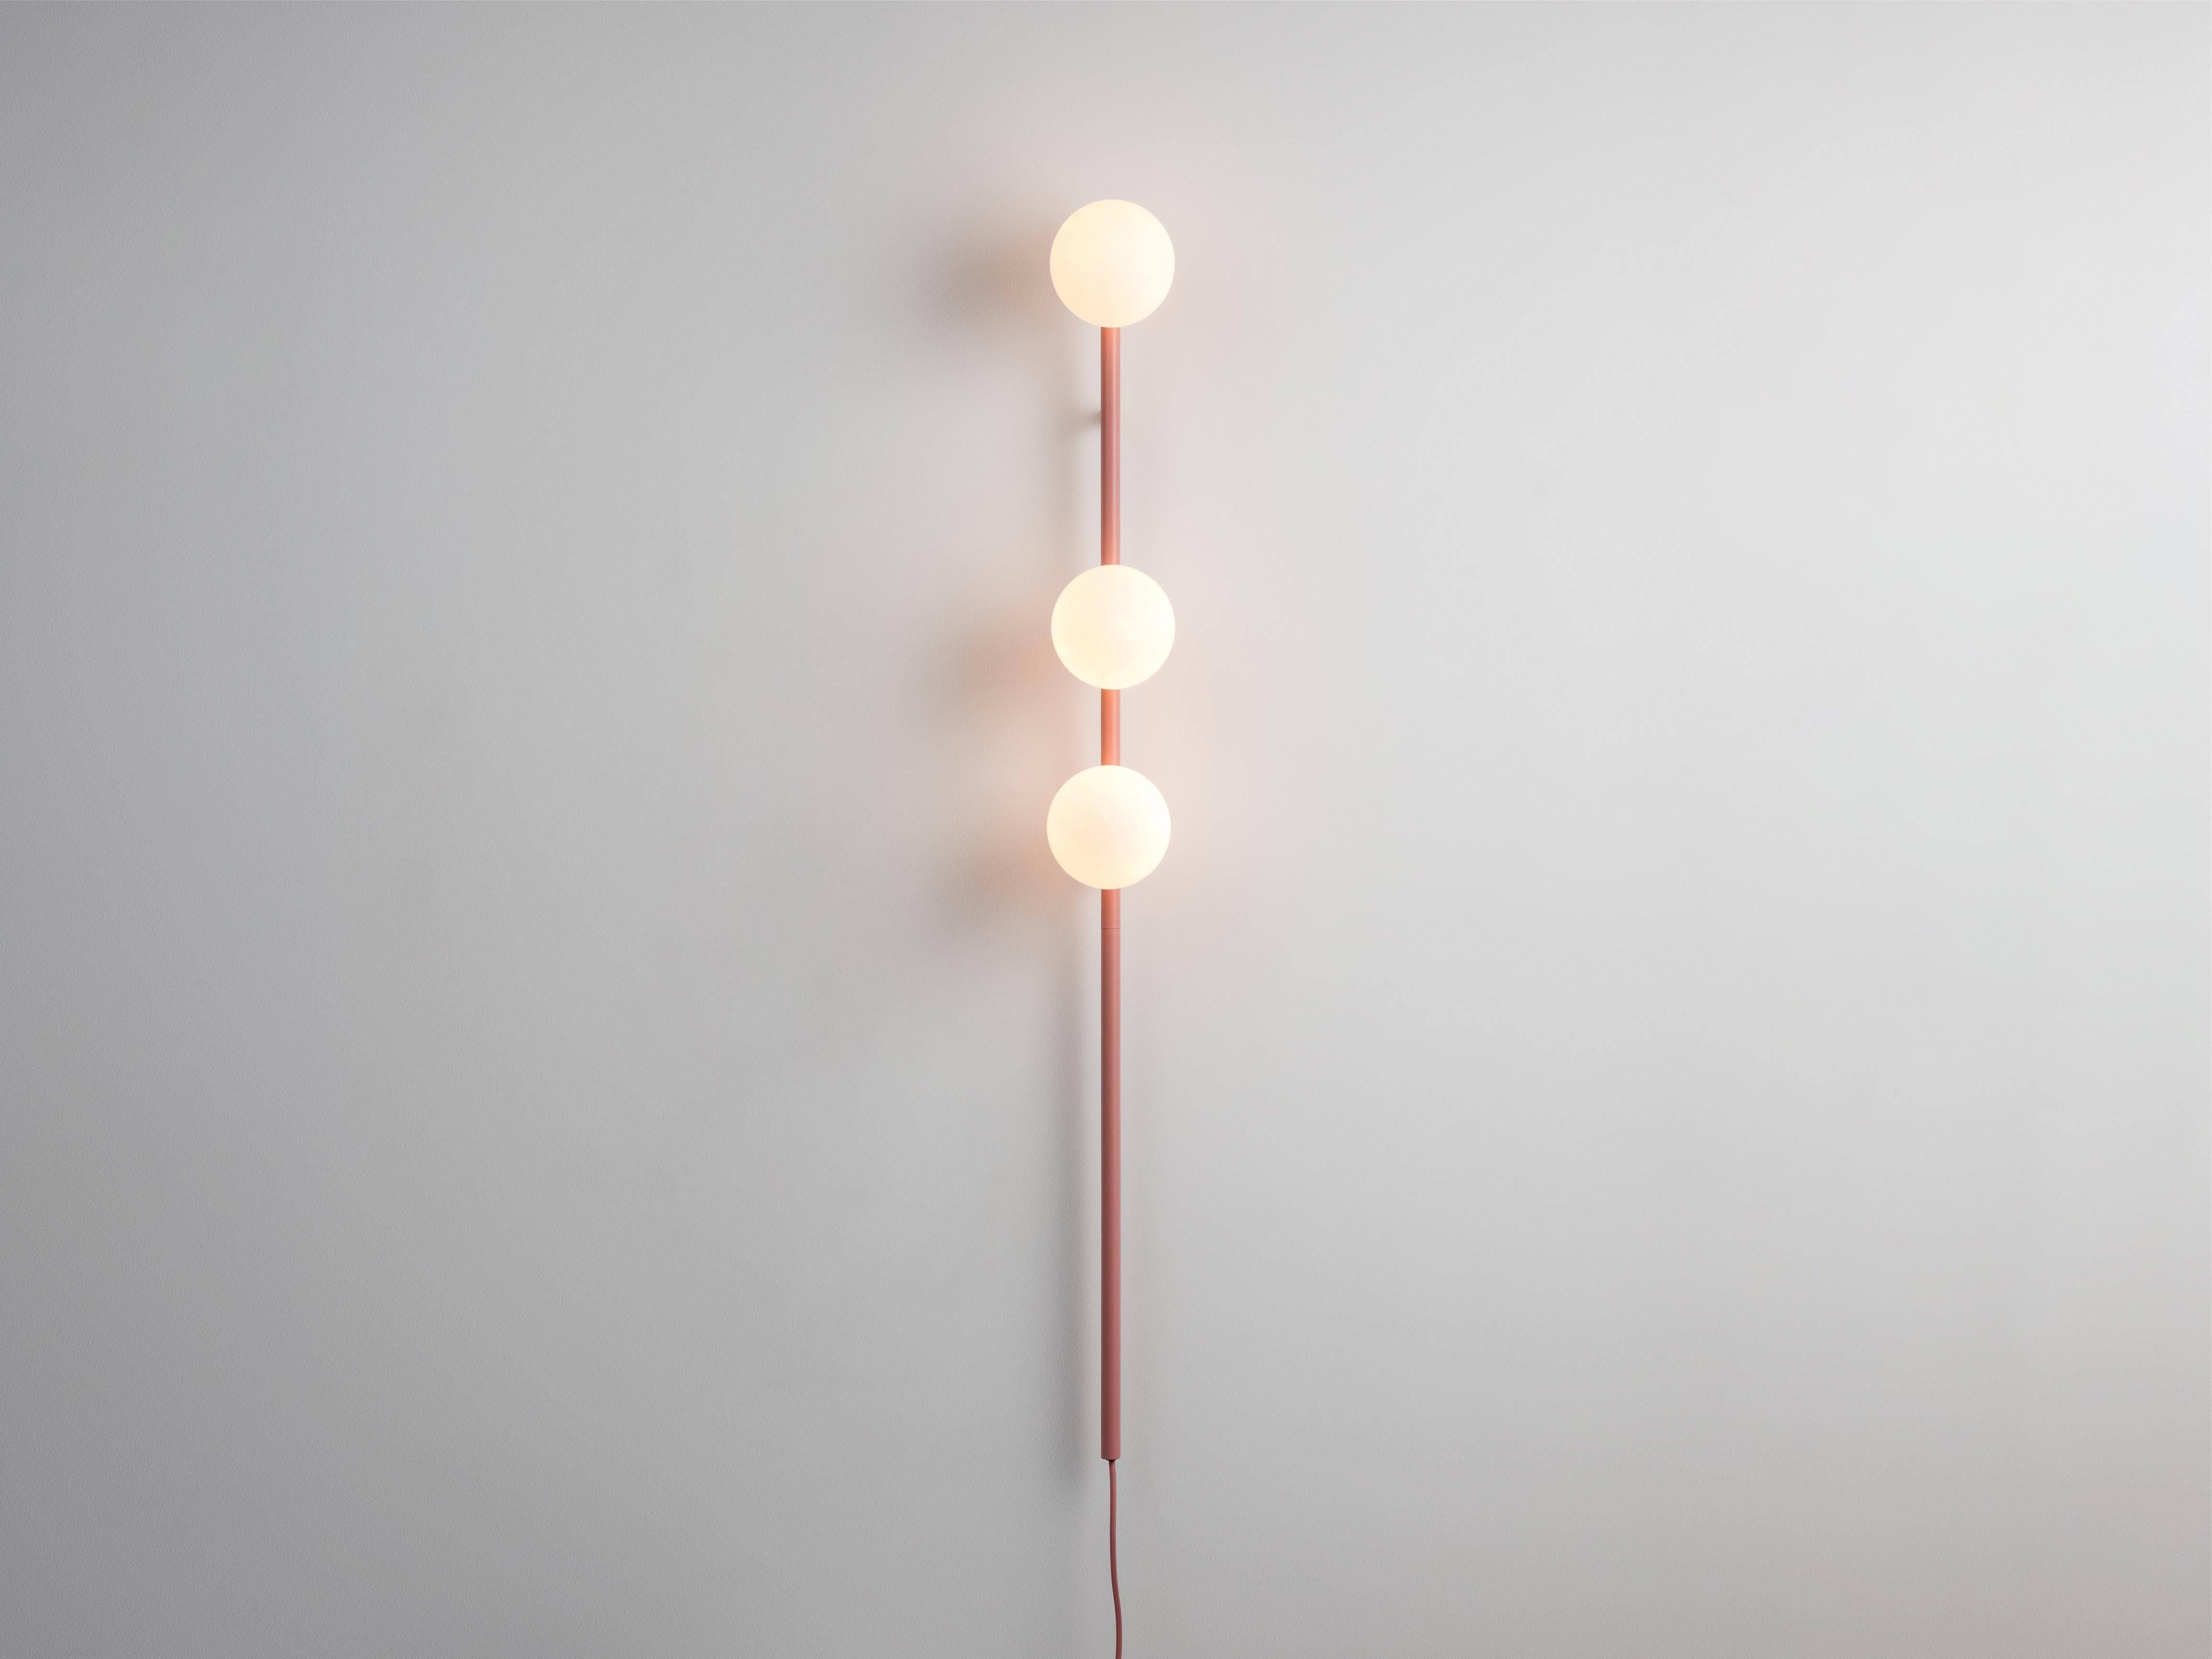 A perfect space saving light our bold soft pink bar opal ball wall light. With the power of a floor lamp but without the footprint, the metal bar holds three opal glass shades, which diffuse a soft, illuminating glow over your living spaces; With a